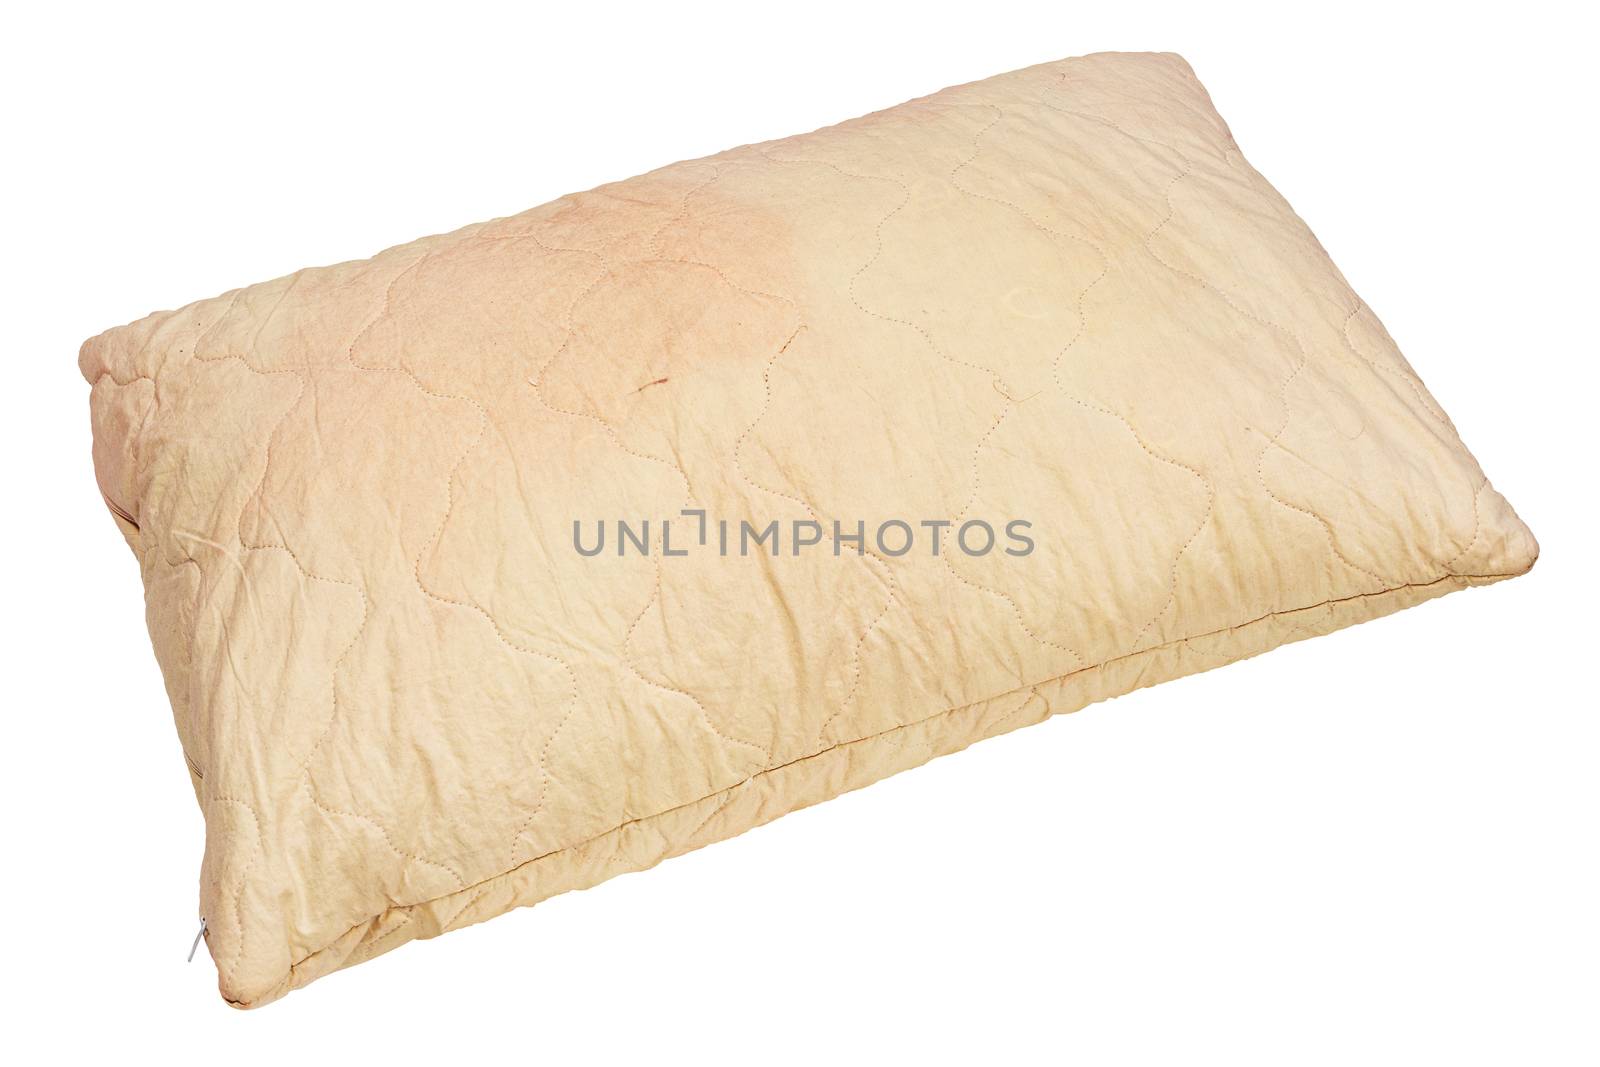 dirty used spotted pillow isolated on white background in diagonal composition by z1b